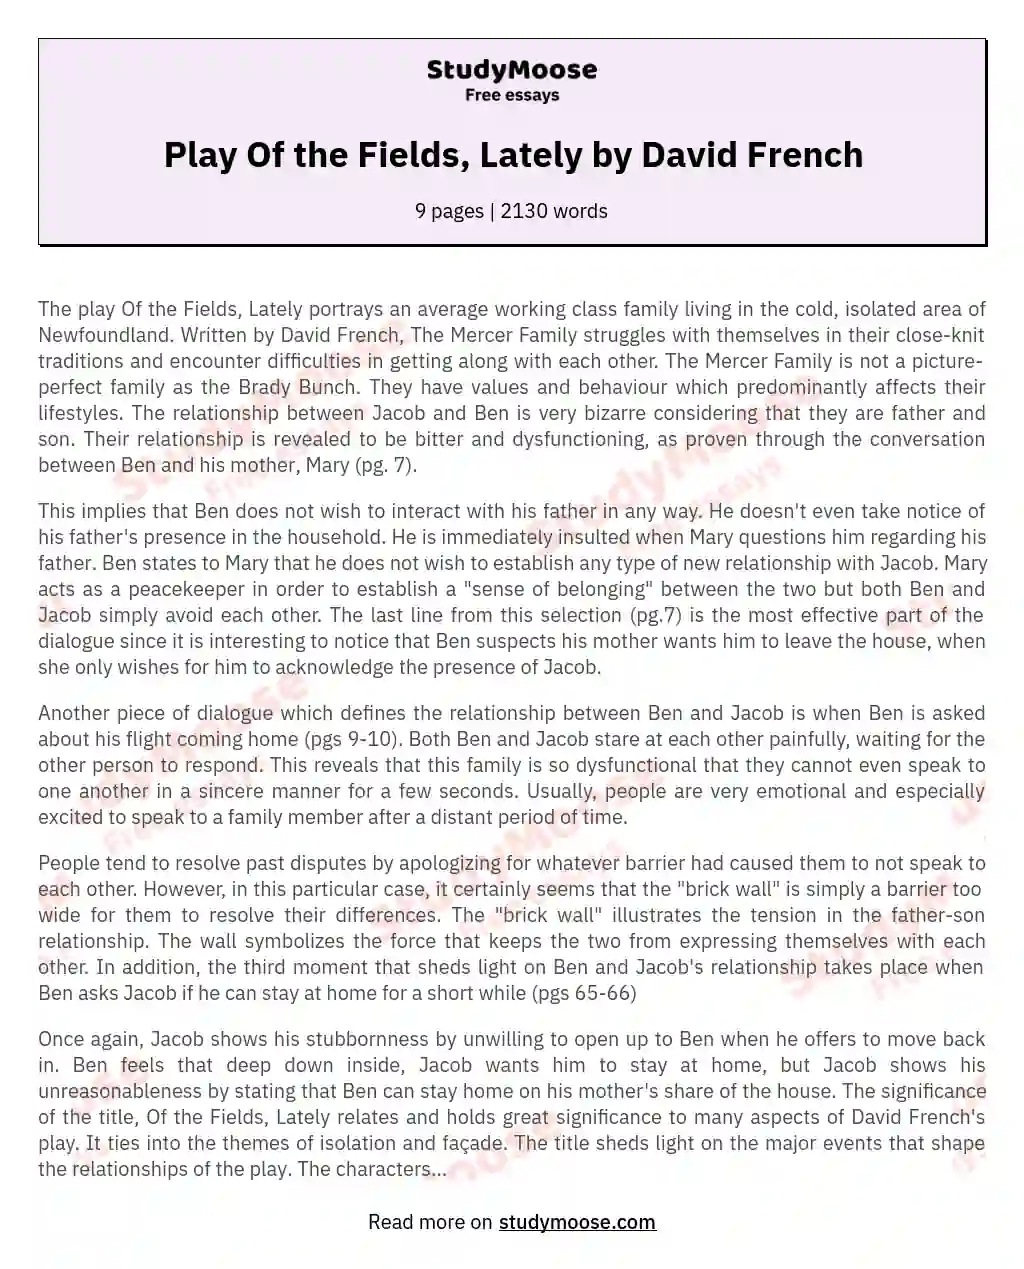 Play Of the Fields, Lately by David French essay